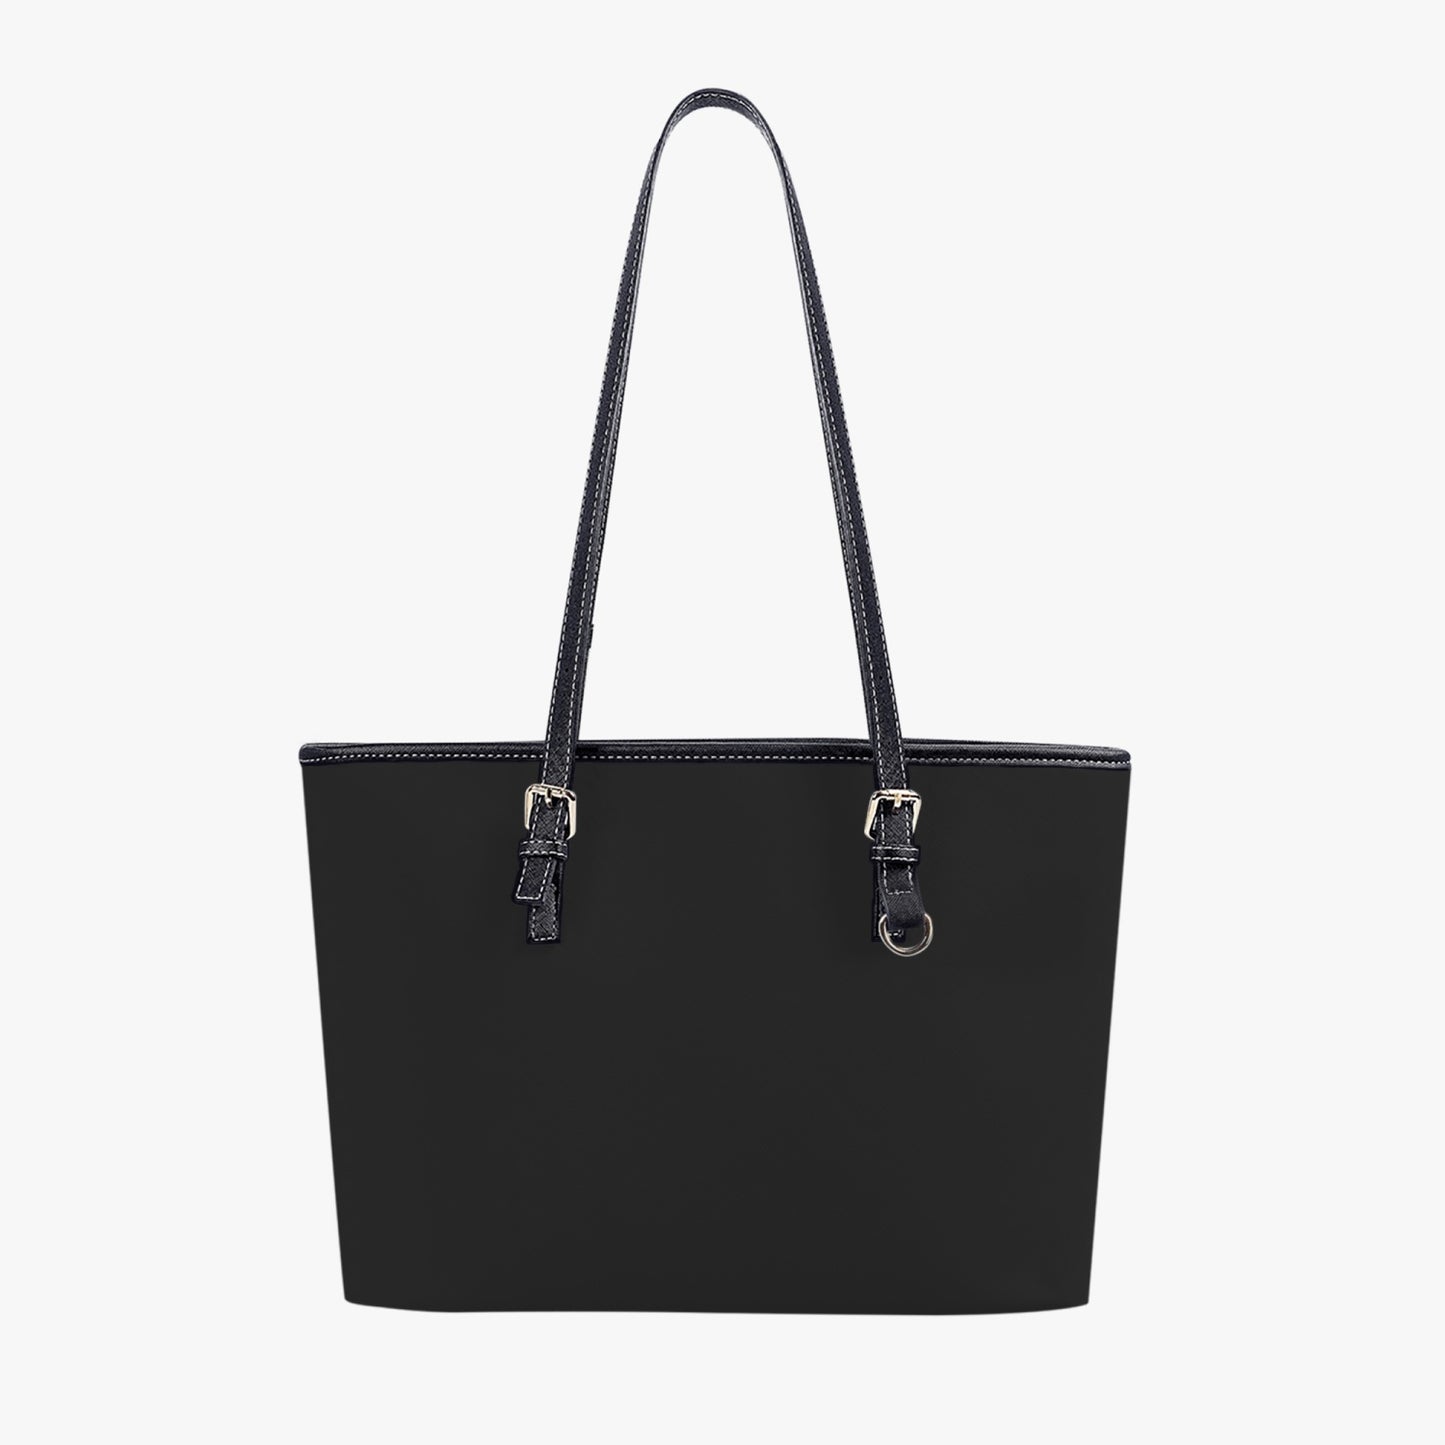 587. Medium Leather Tote Bag for Women